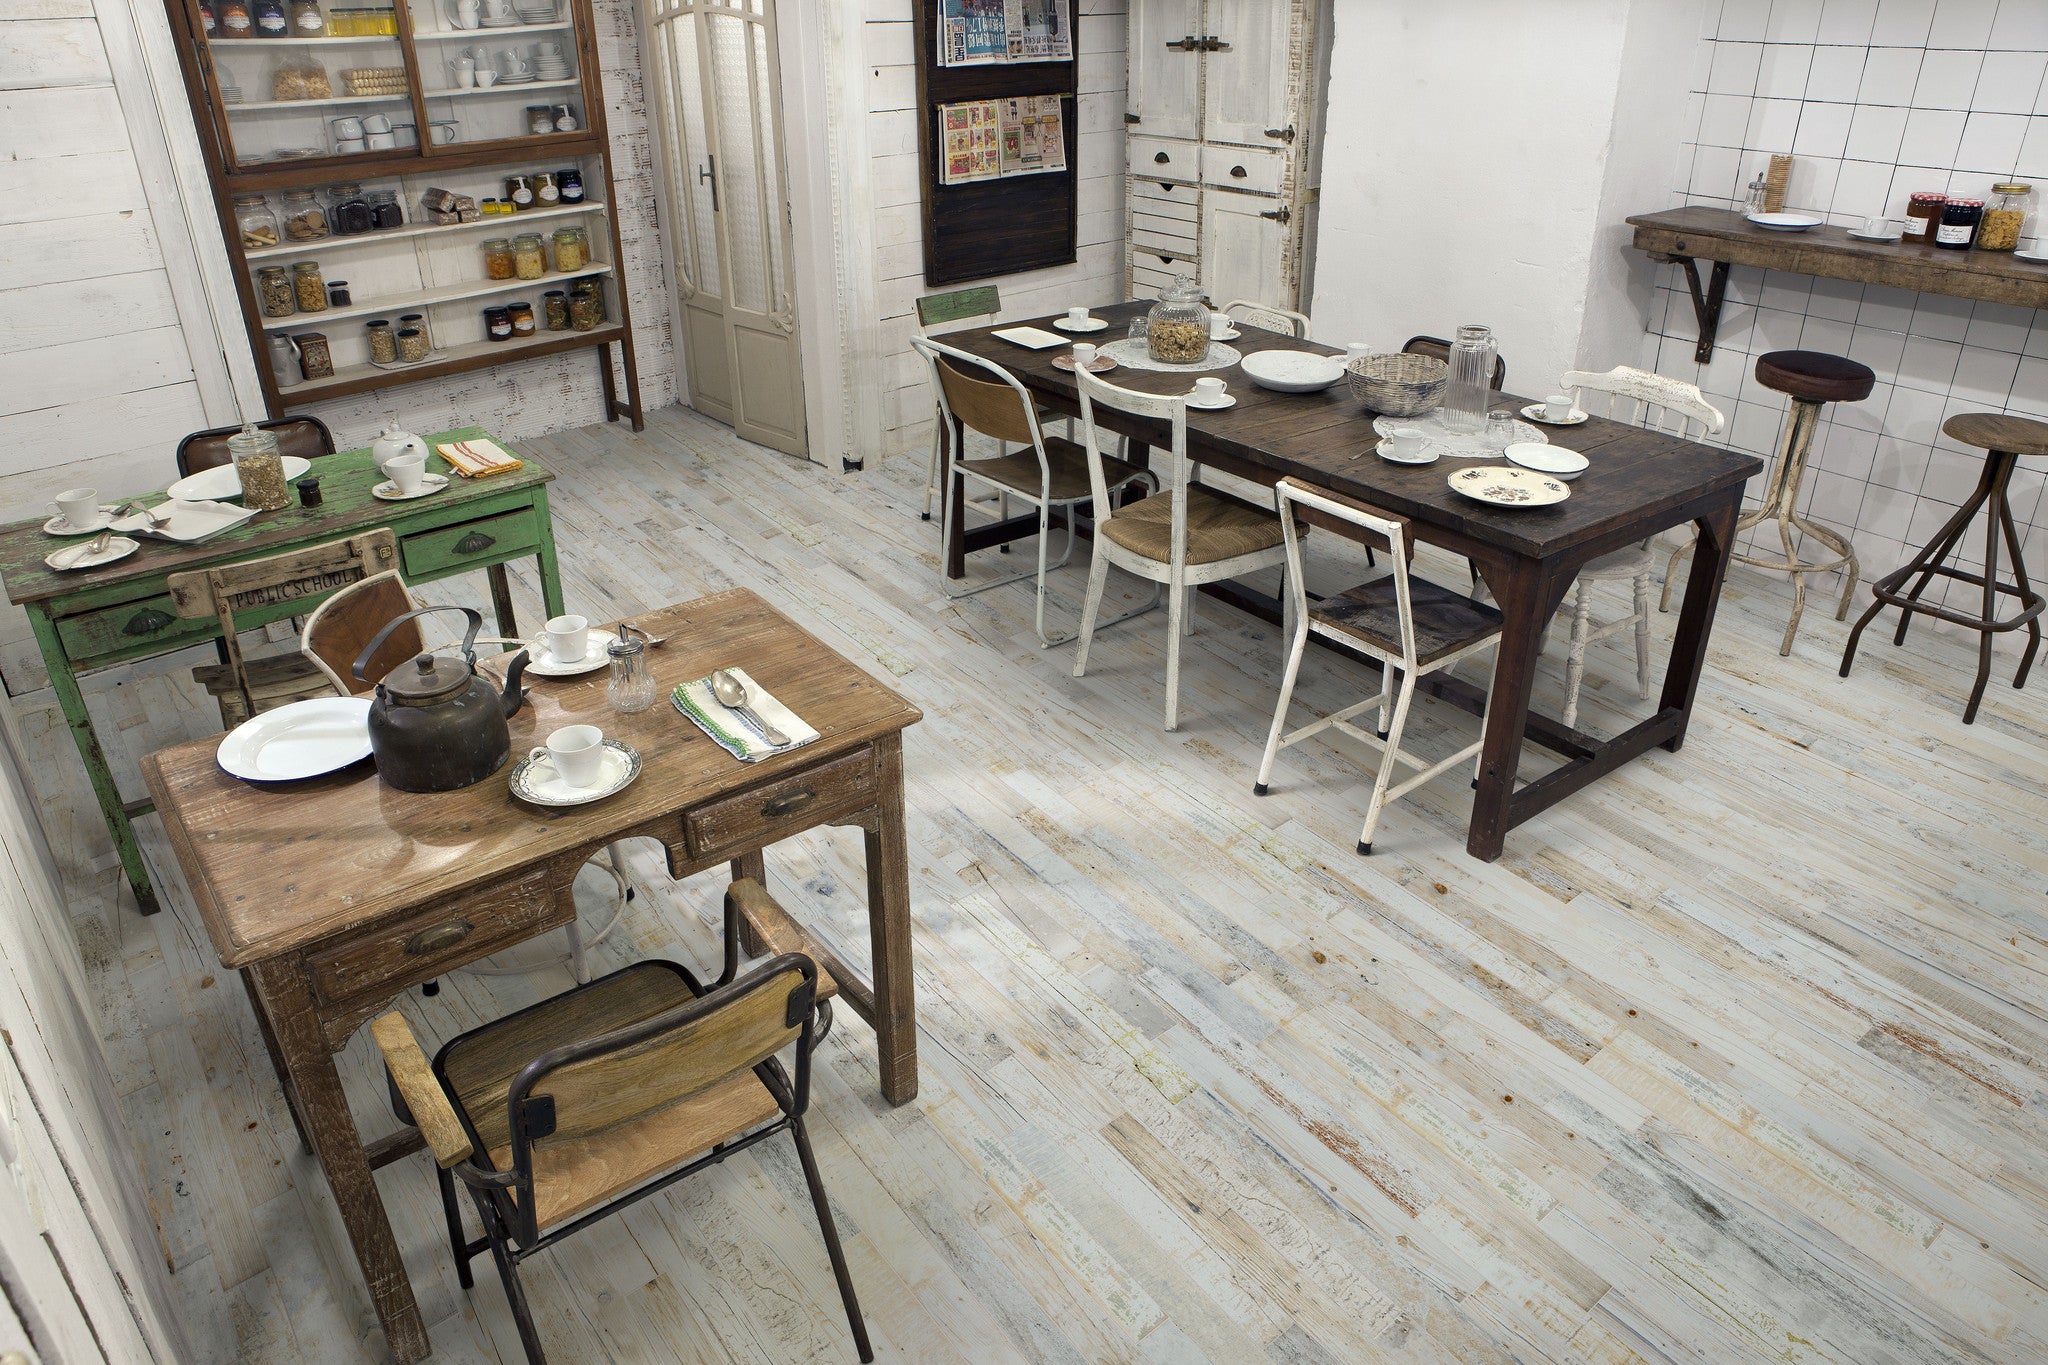 Salvage Wood Effect Floor Tiles for a Cafe